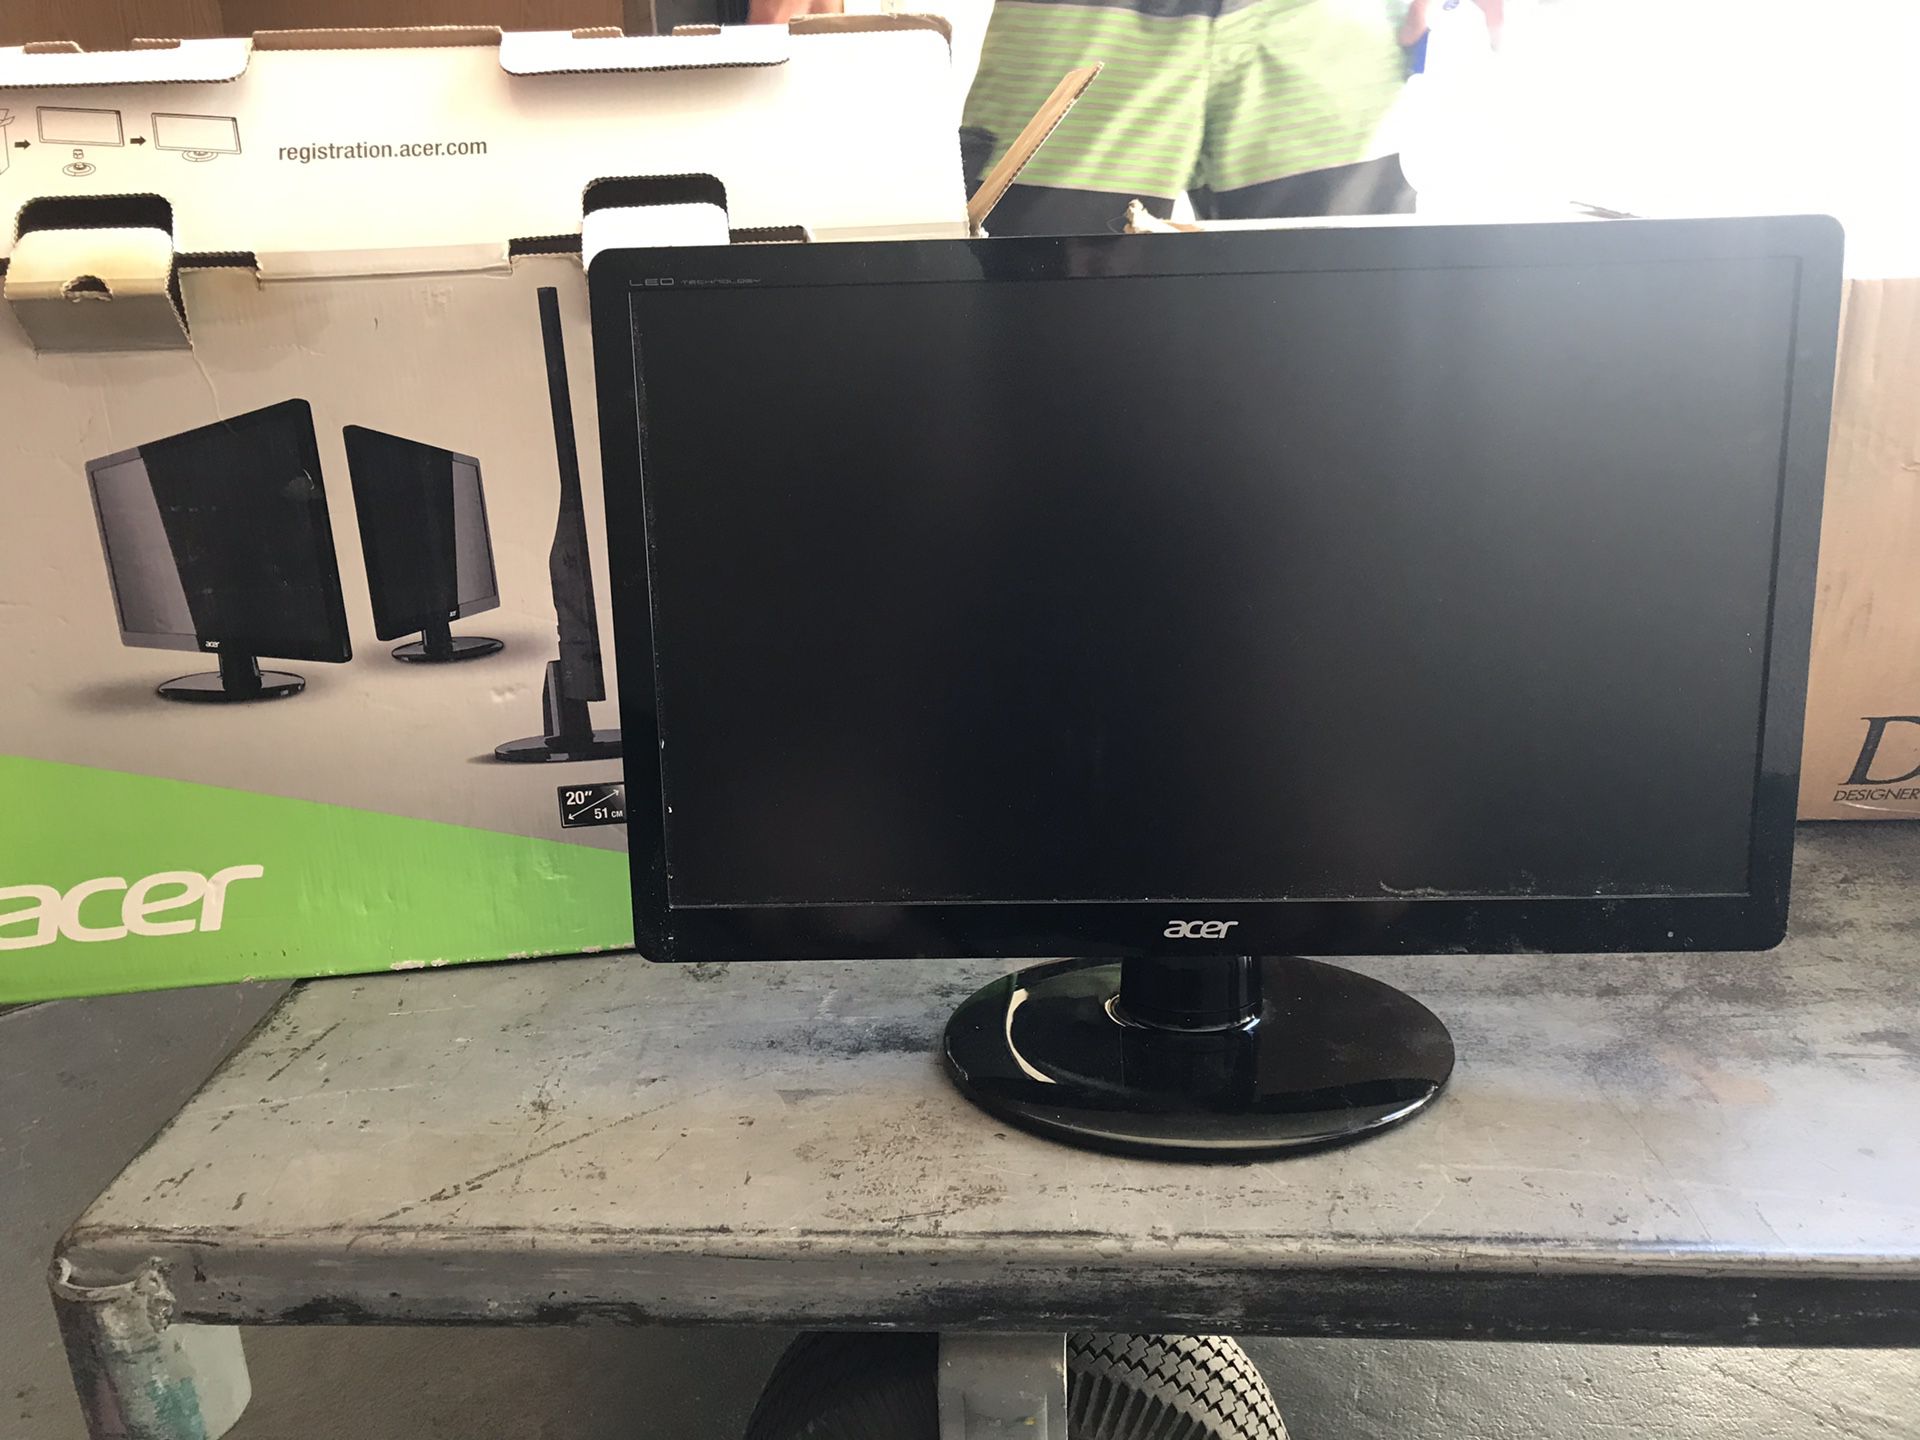 Acer 20” HD LED computer monitor